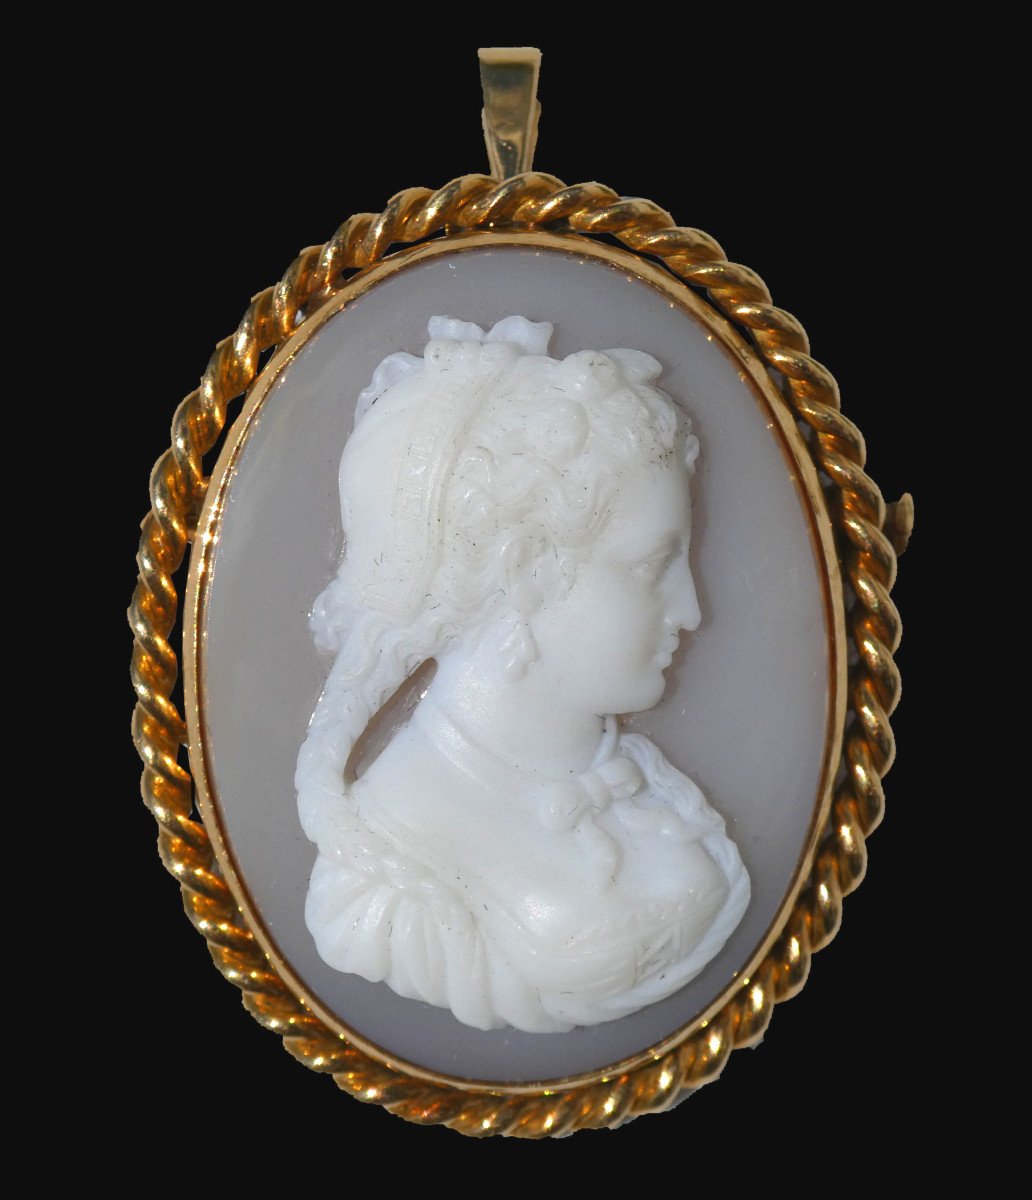 Cameo In Agate Napoleon III Period, Brooch & Pendant, Profile Of Young Woman 1860 Gold Mount